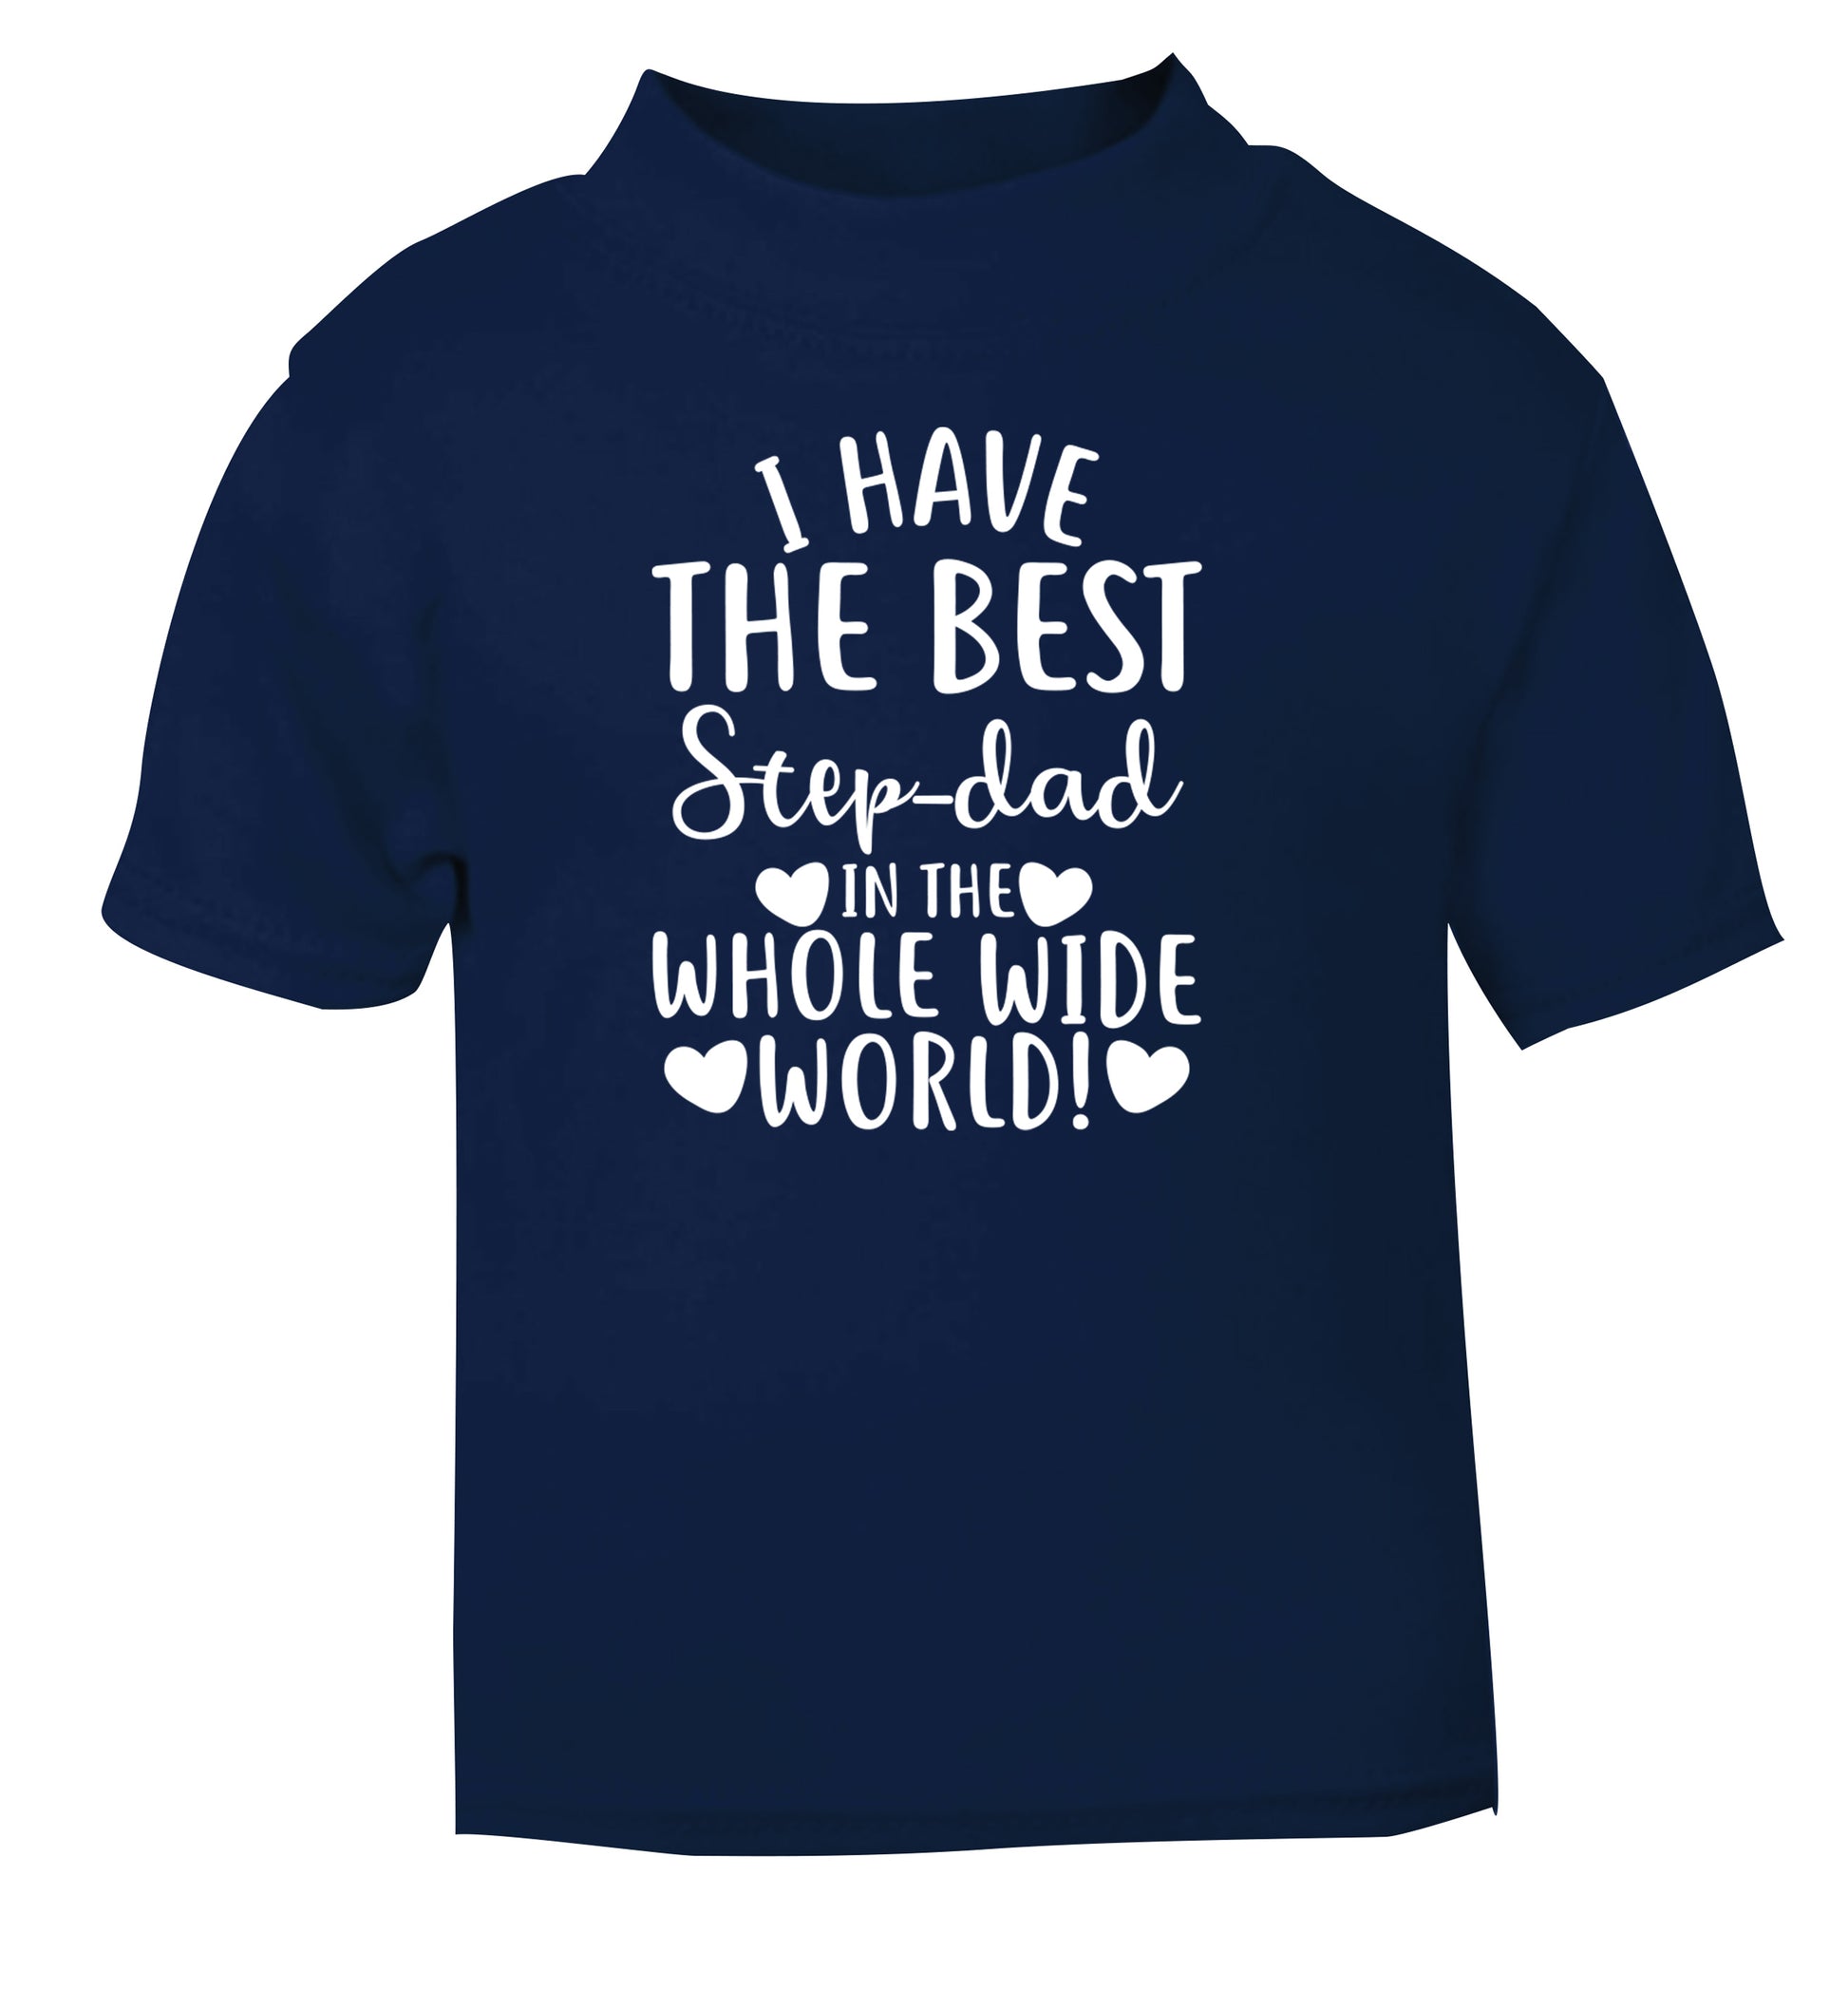 I have the best step-dad in the whole wide world! navy Baby Toddler Tshirt 2 Years